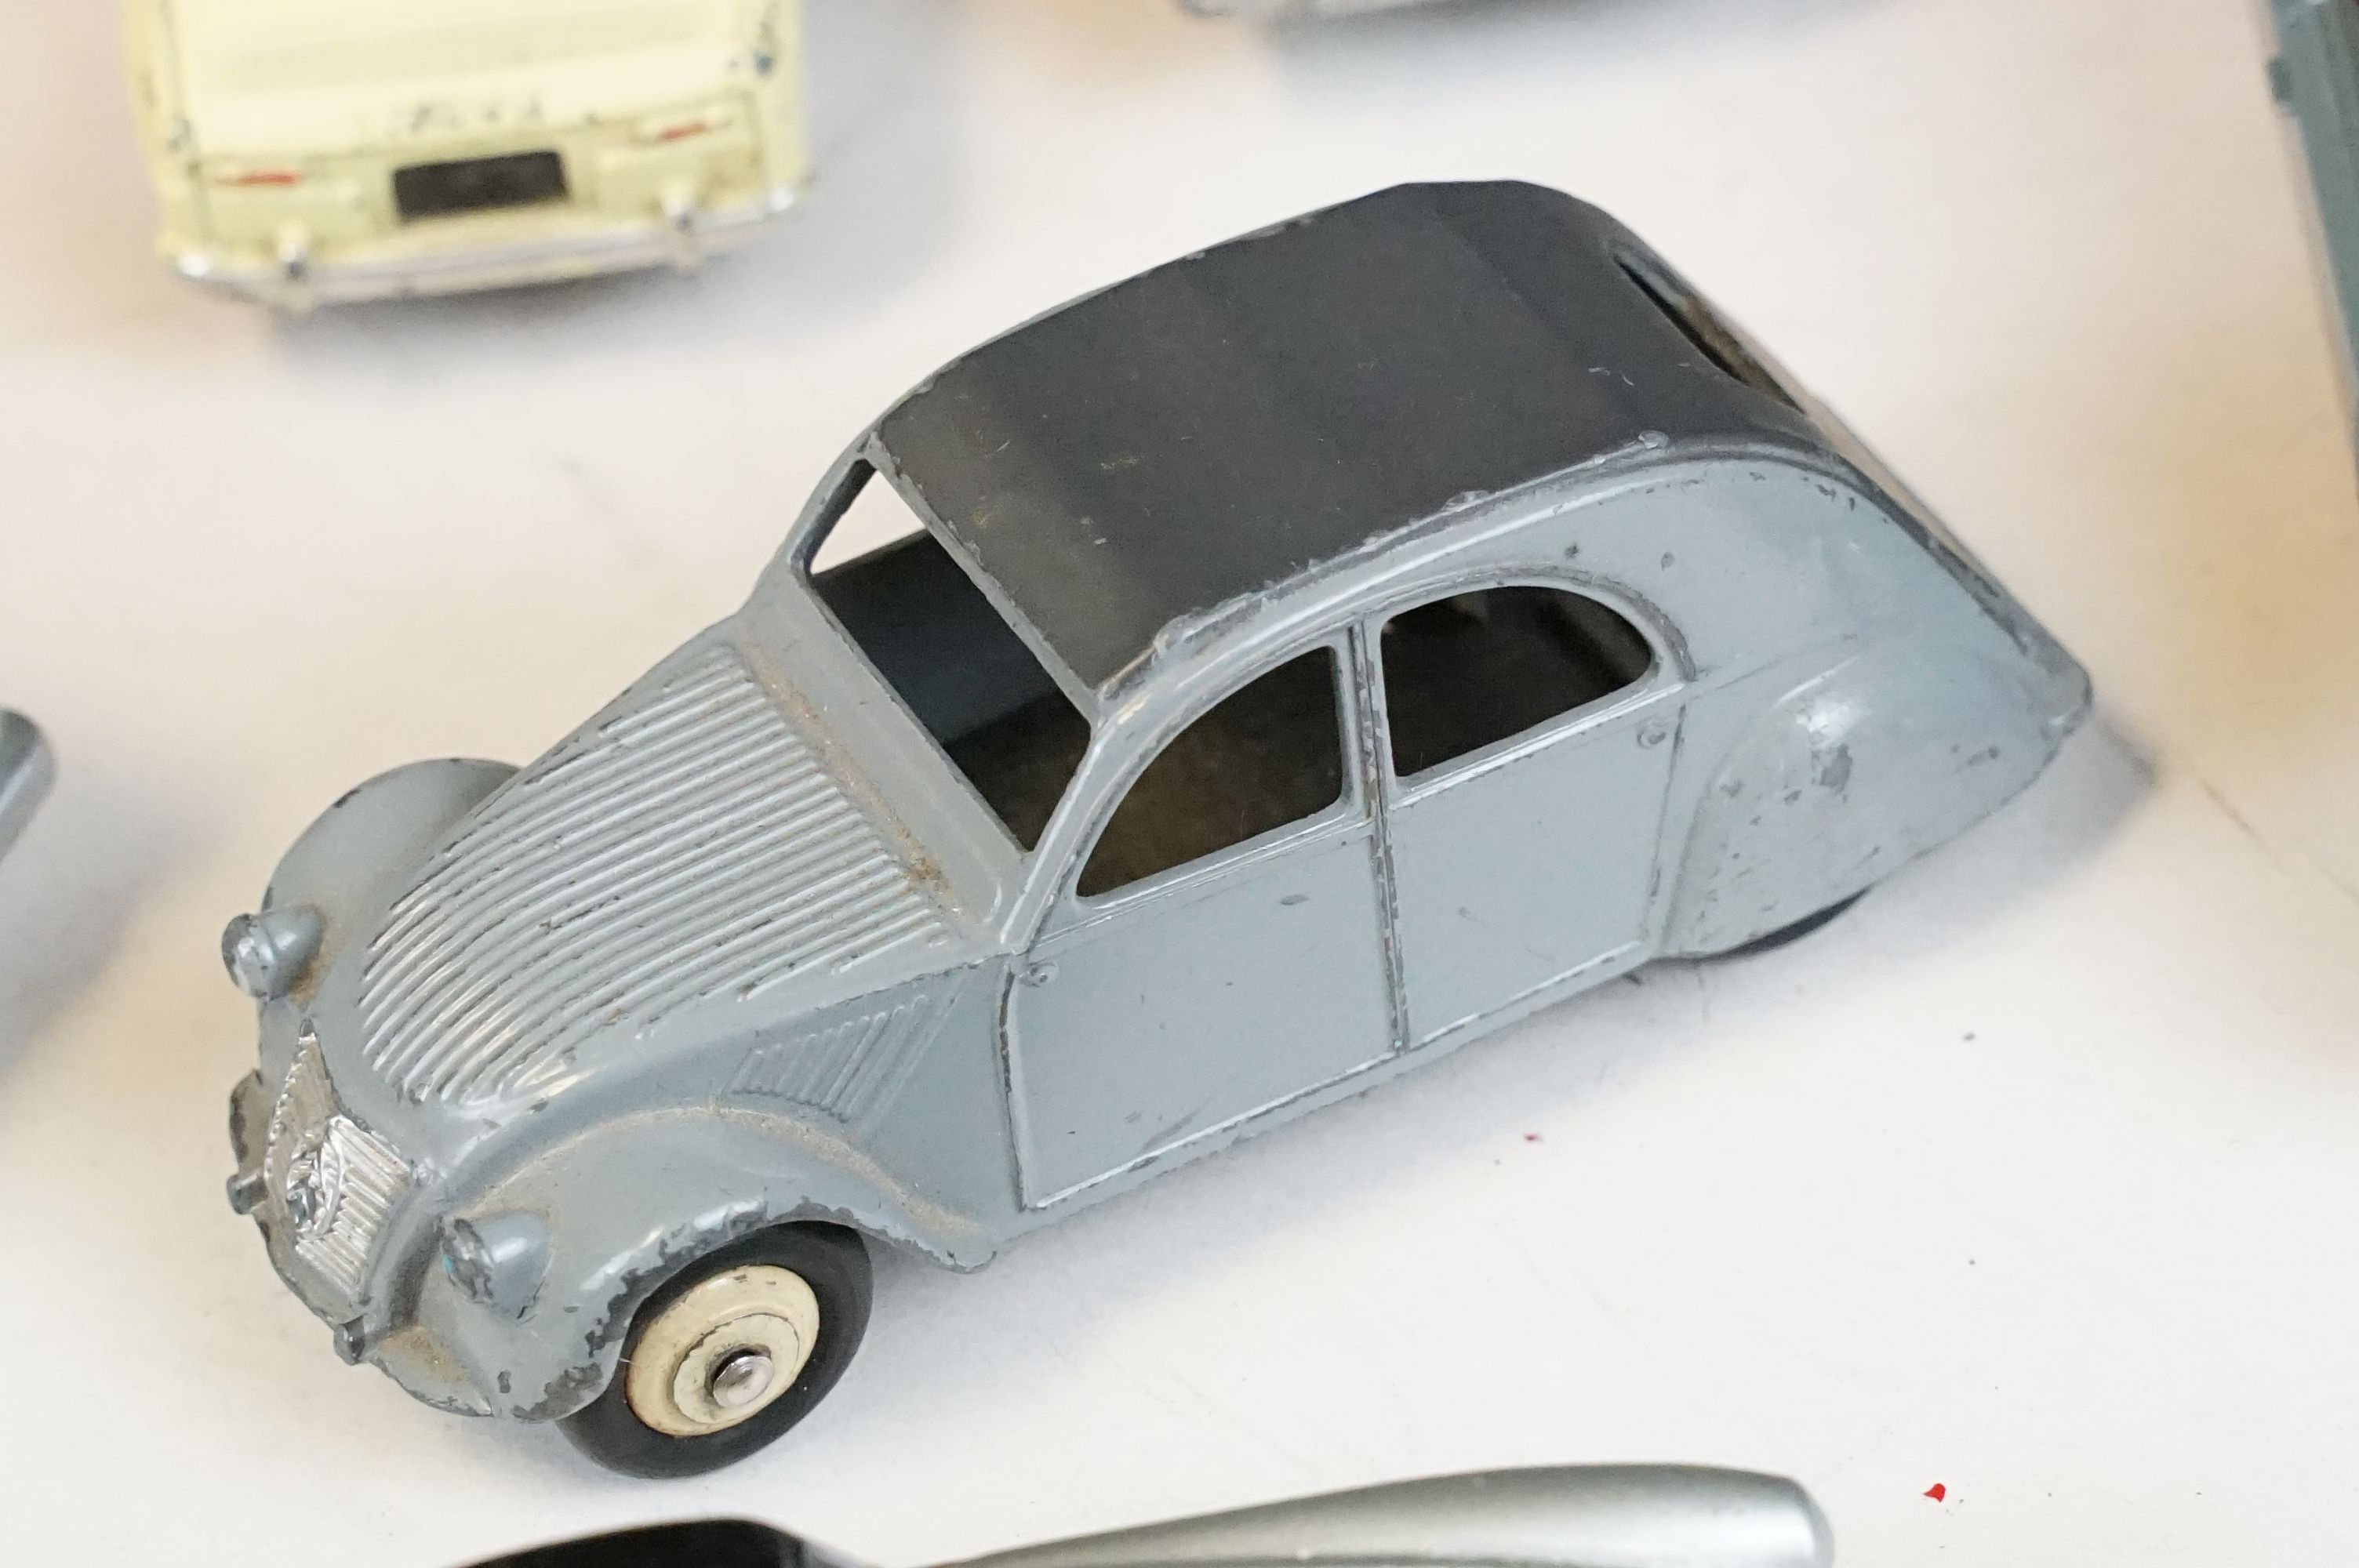 22 French Mid 20th C play worn Dinky diecast models to include Panhard PL17, 24J Coupe Alfa Romeo, - Image 7 of 9